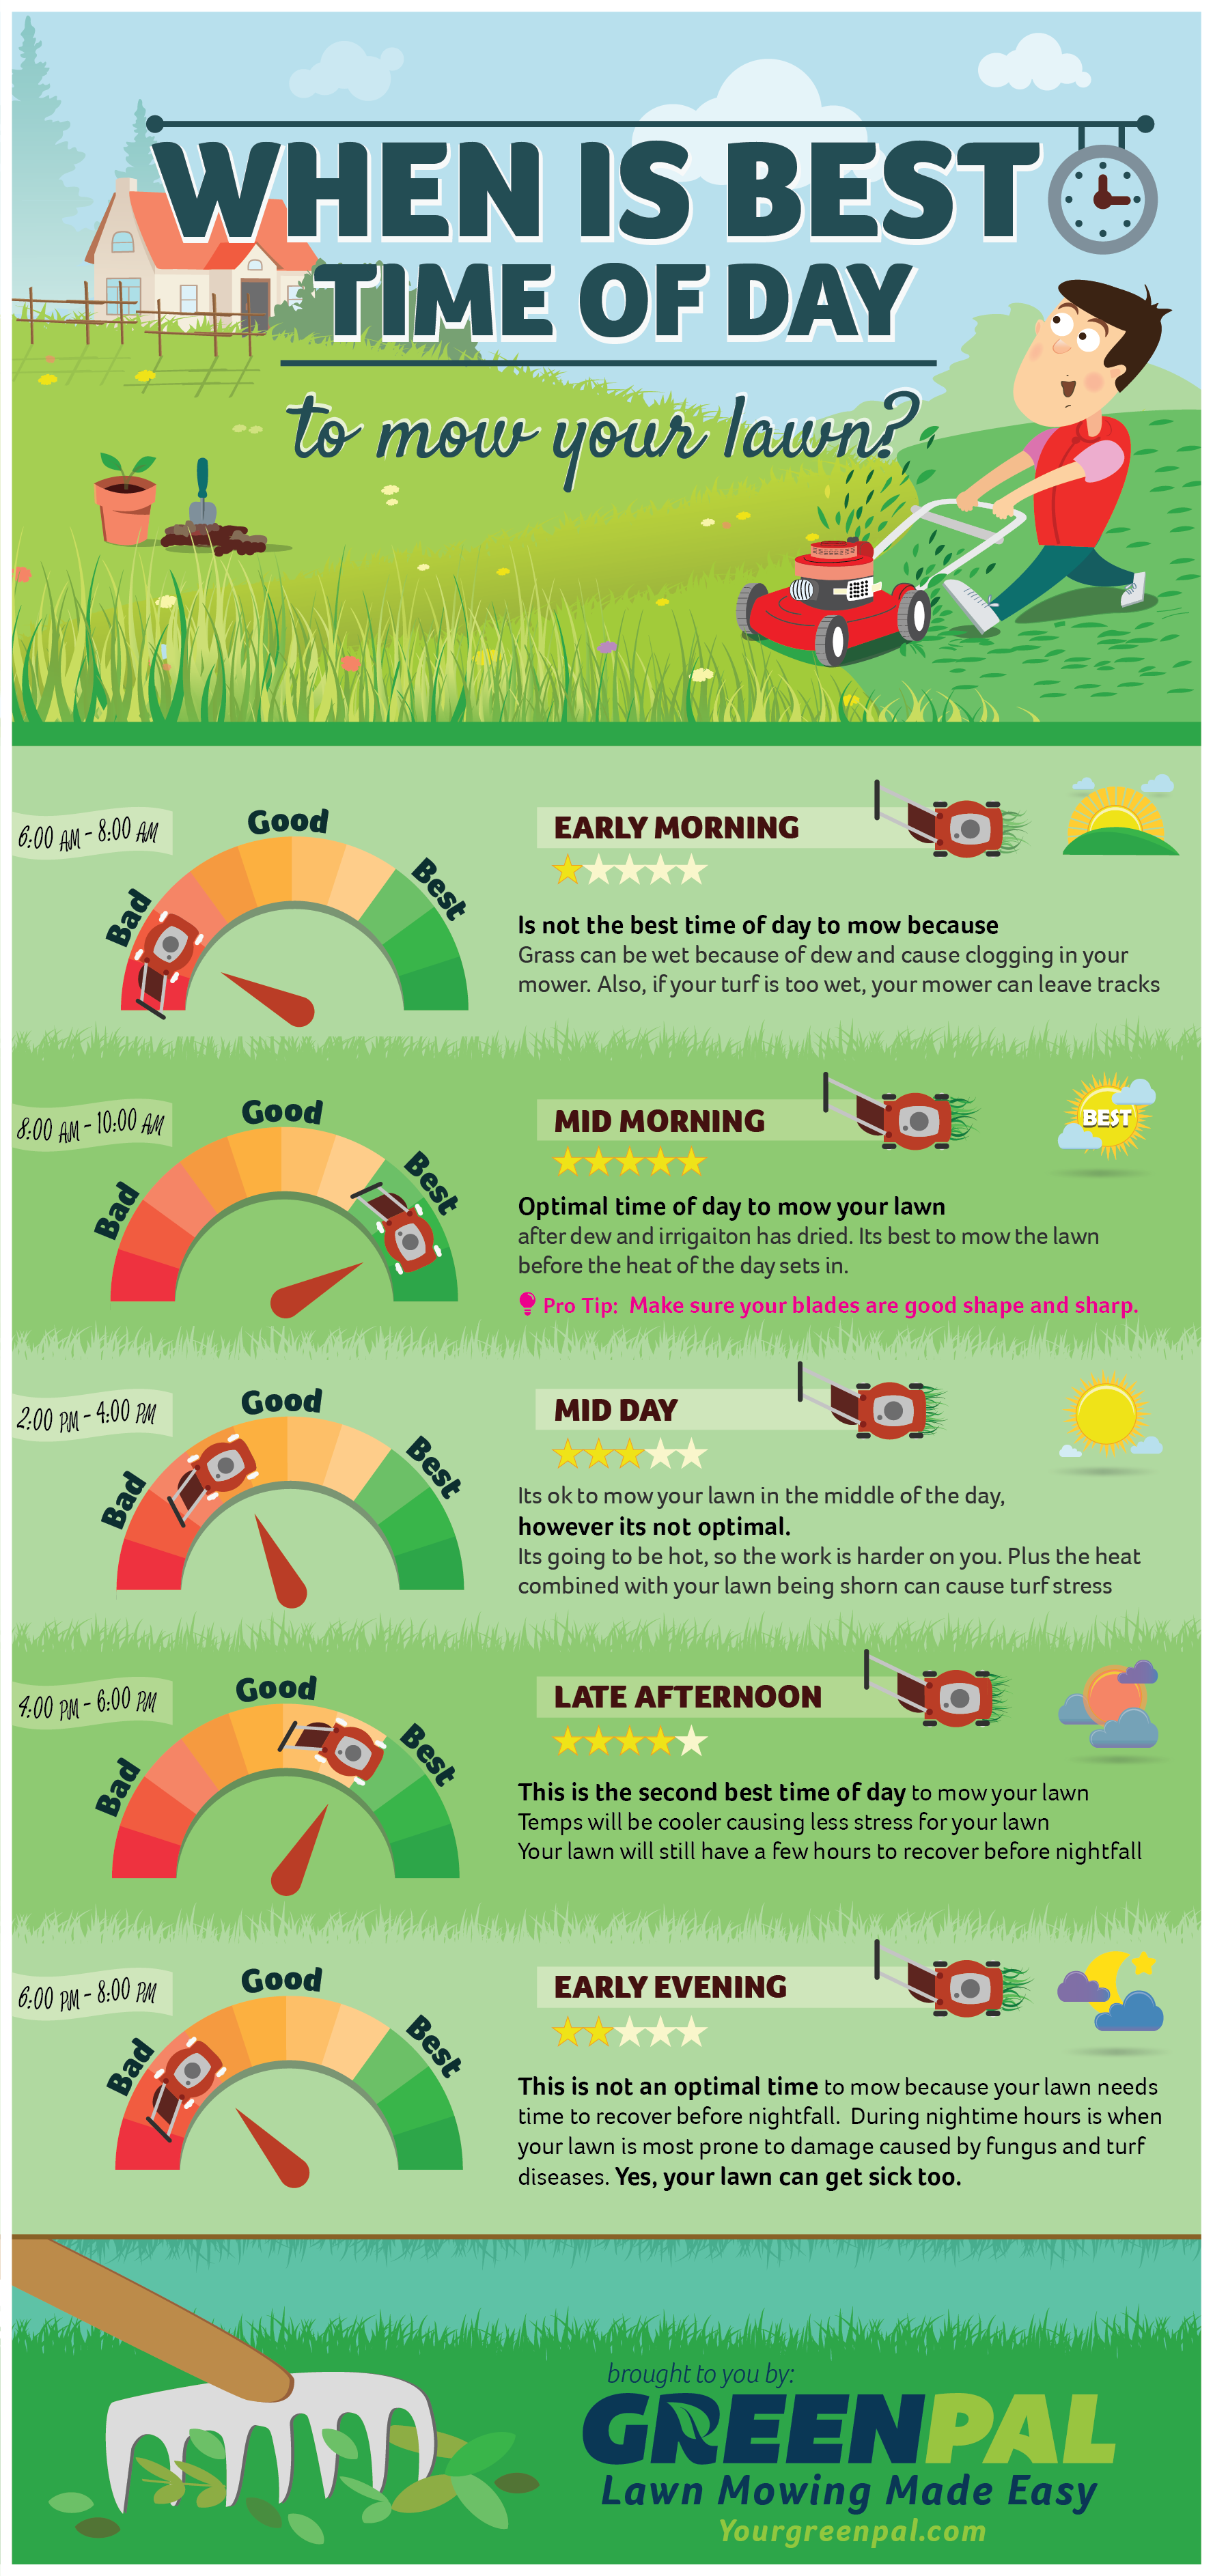 Discover The Optimal Frequency For Cutting Grass: How Often Should You Mow Your Lawn?